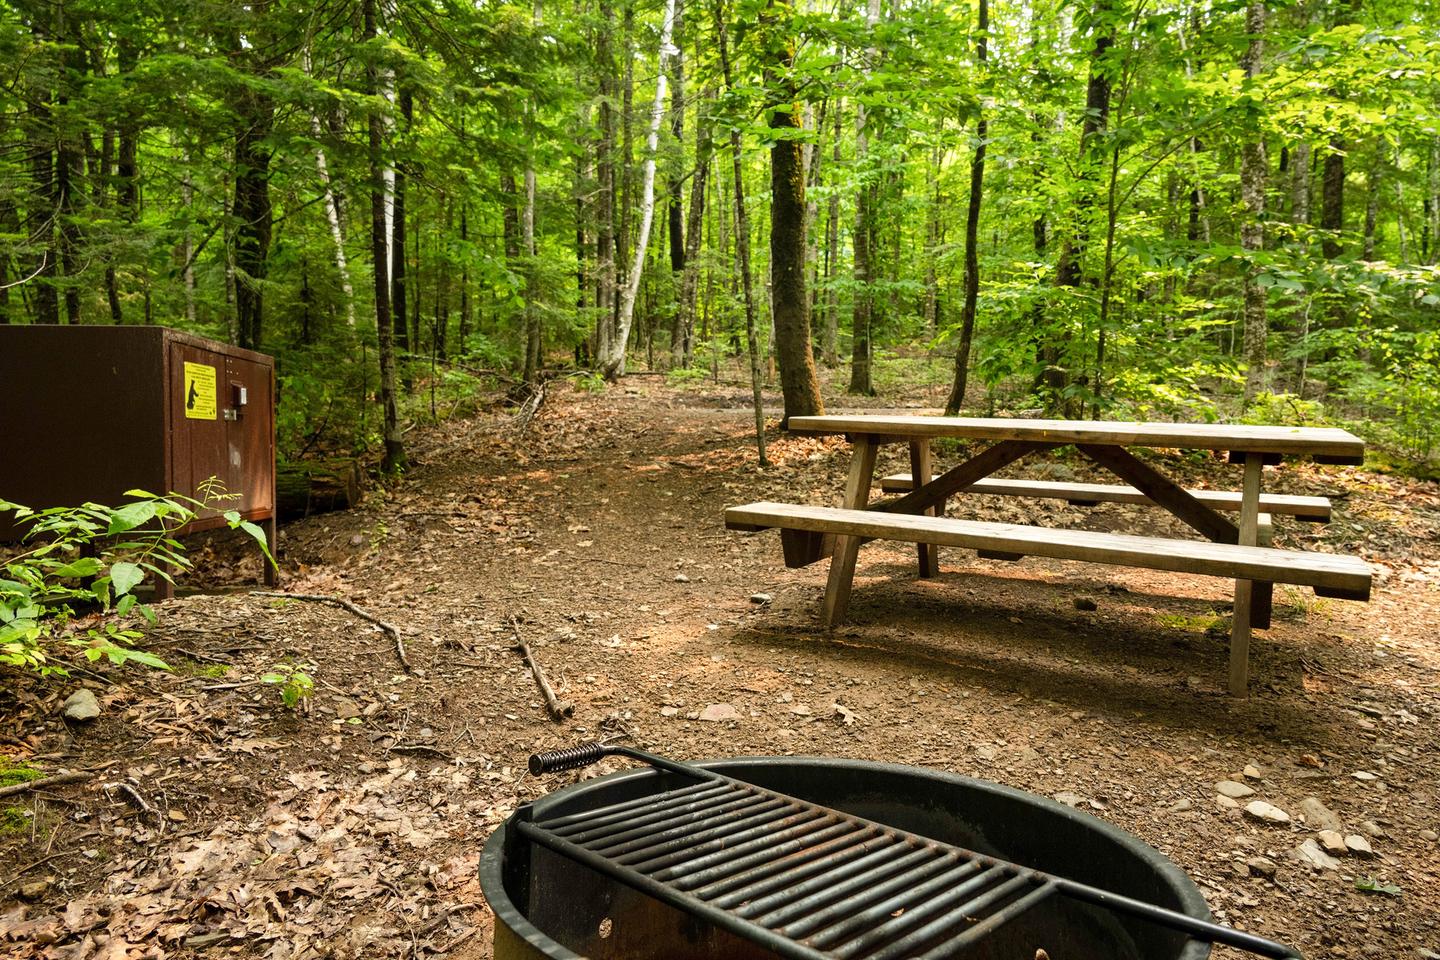 The campsite has a picnic area. A metal fire ring is next to the picnic table on the right. A metal brown food storage locker is across from the picnic table.Enjoy a picnic at the campsite. Remember to use the food locker for all scented items!